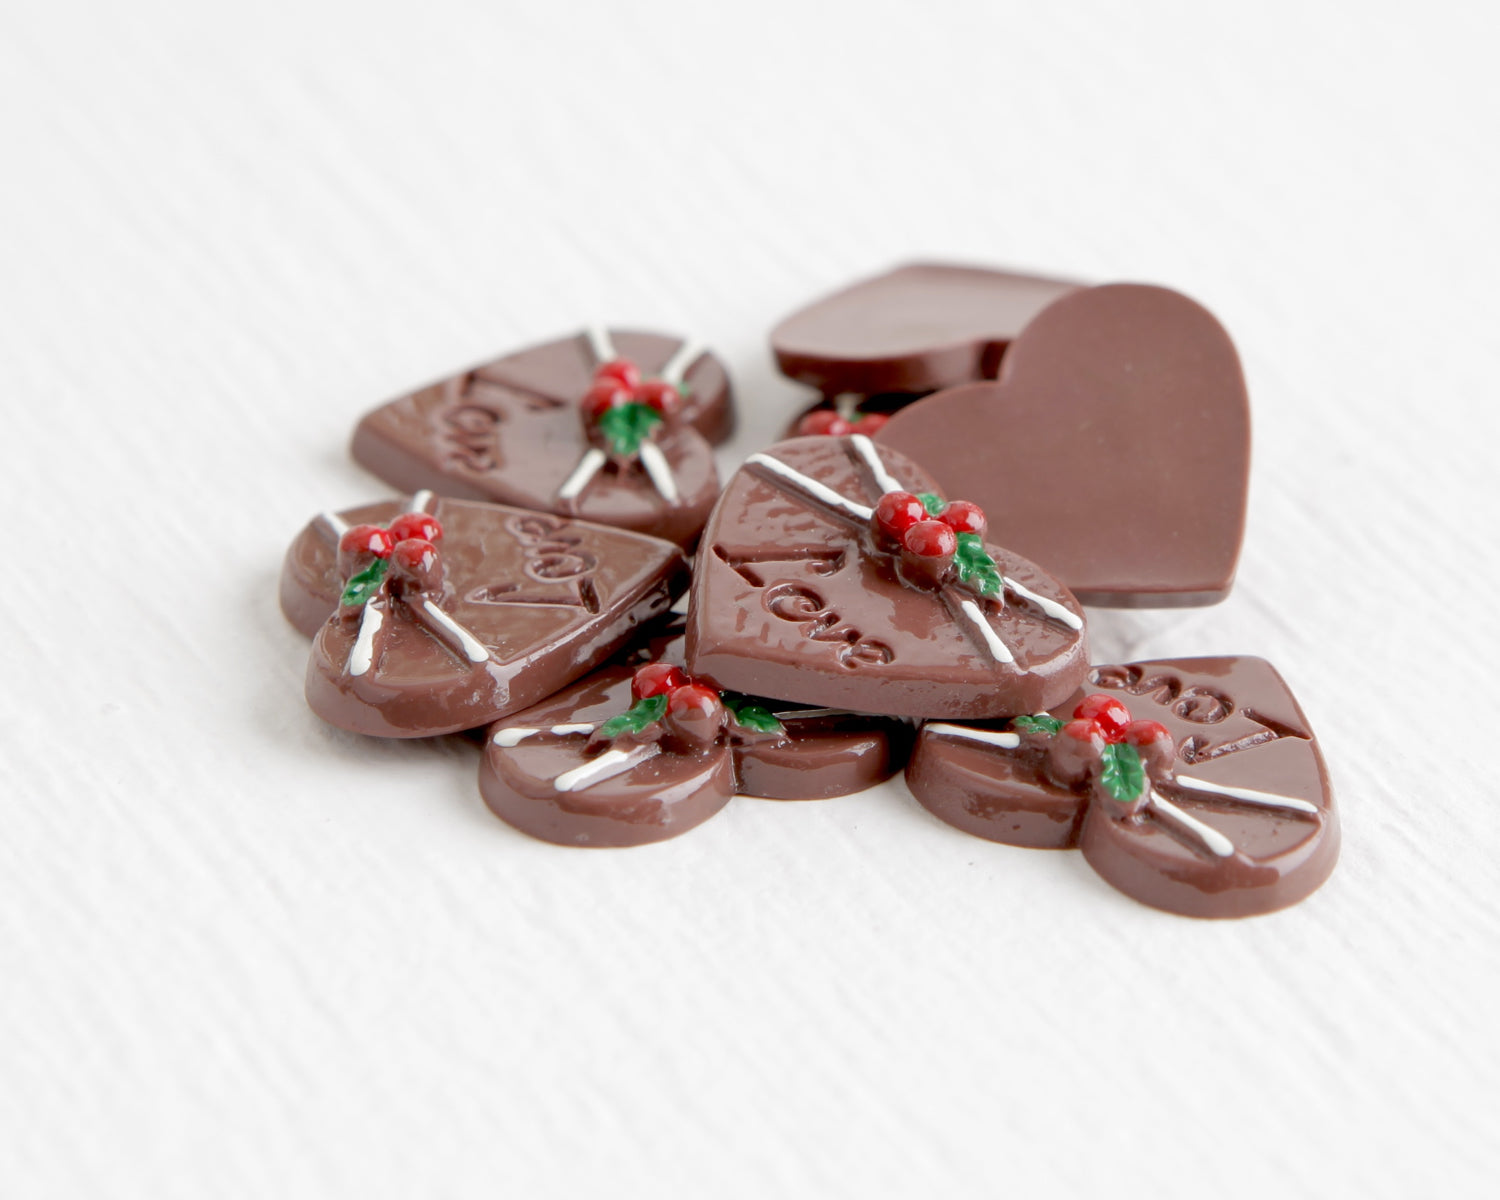 Love Chocolates with Cherries at Lobster Bisque Vintage